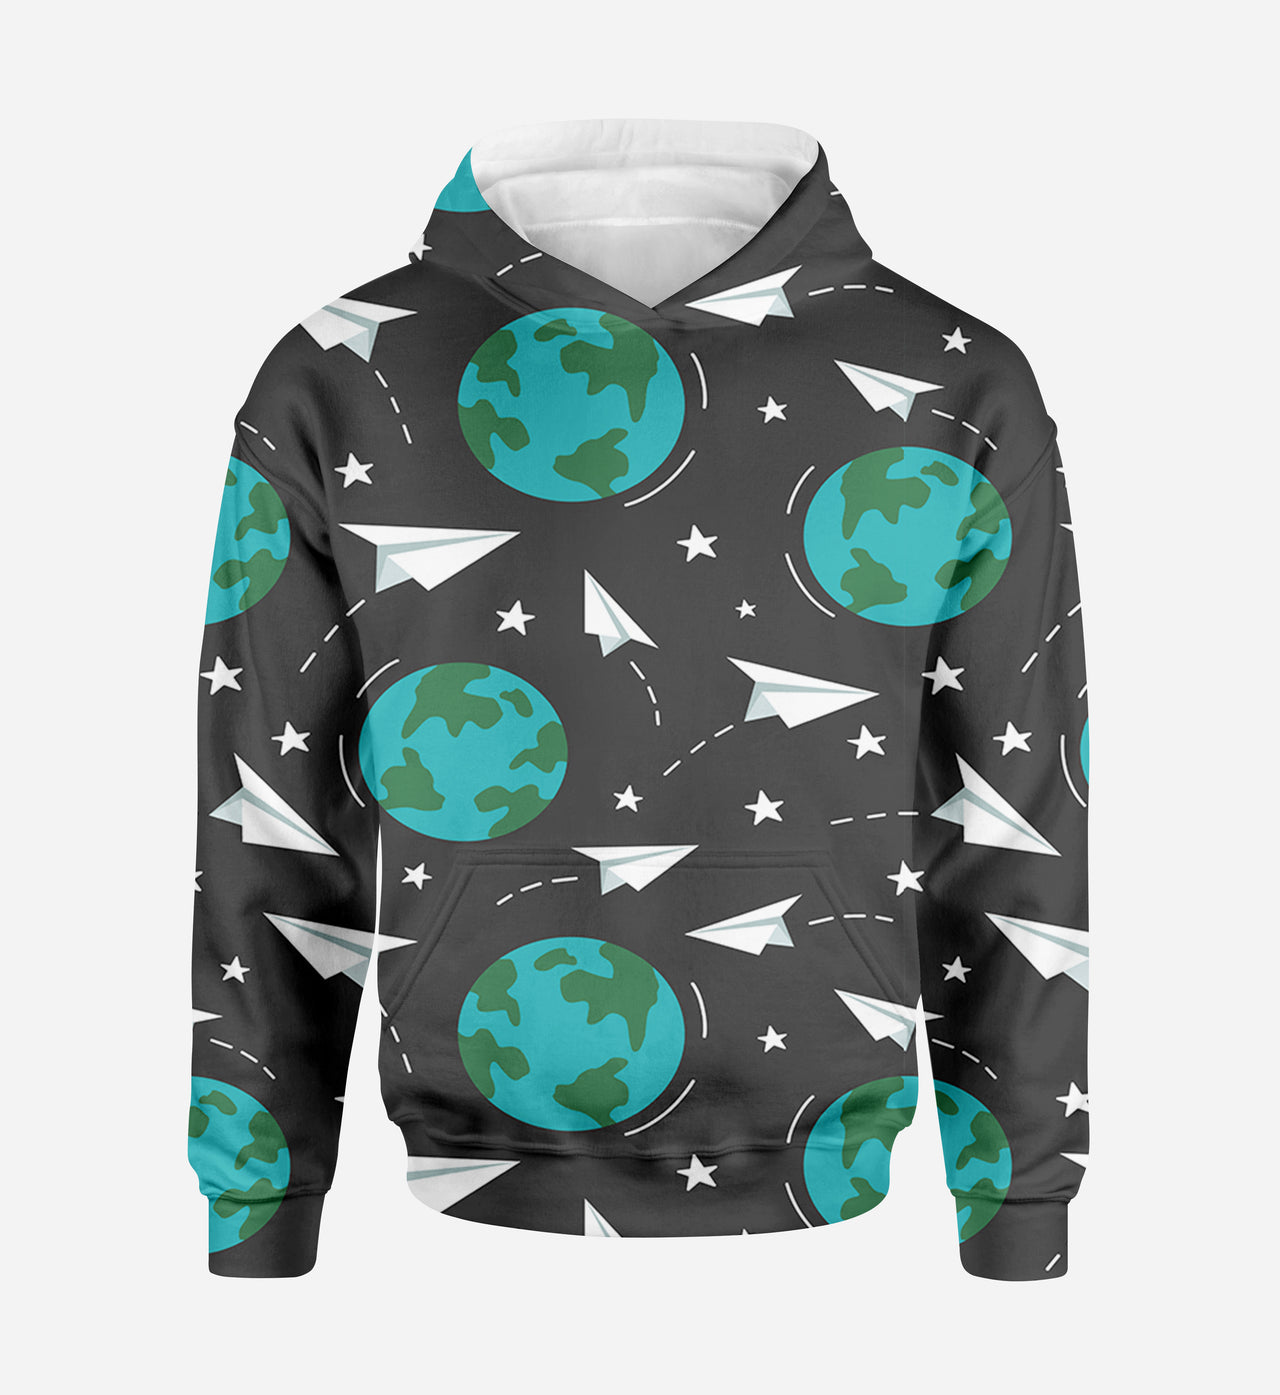 Paper Planes & Earth Designed 3D Hoodies